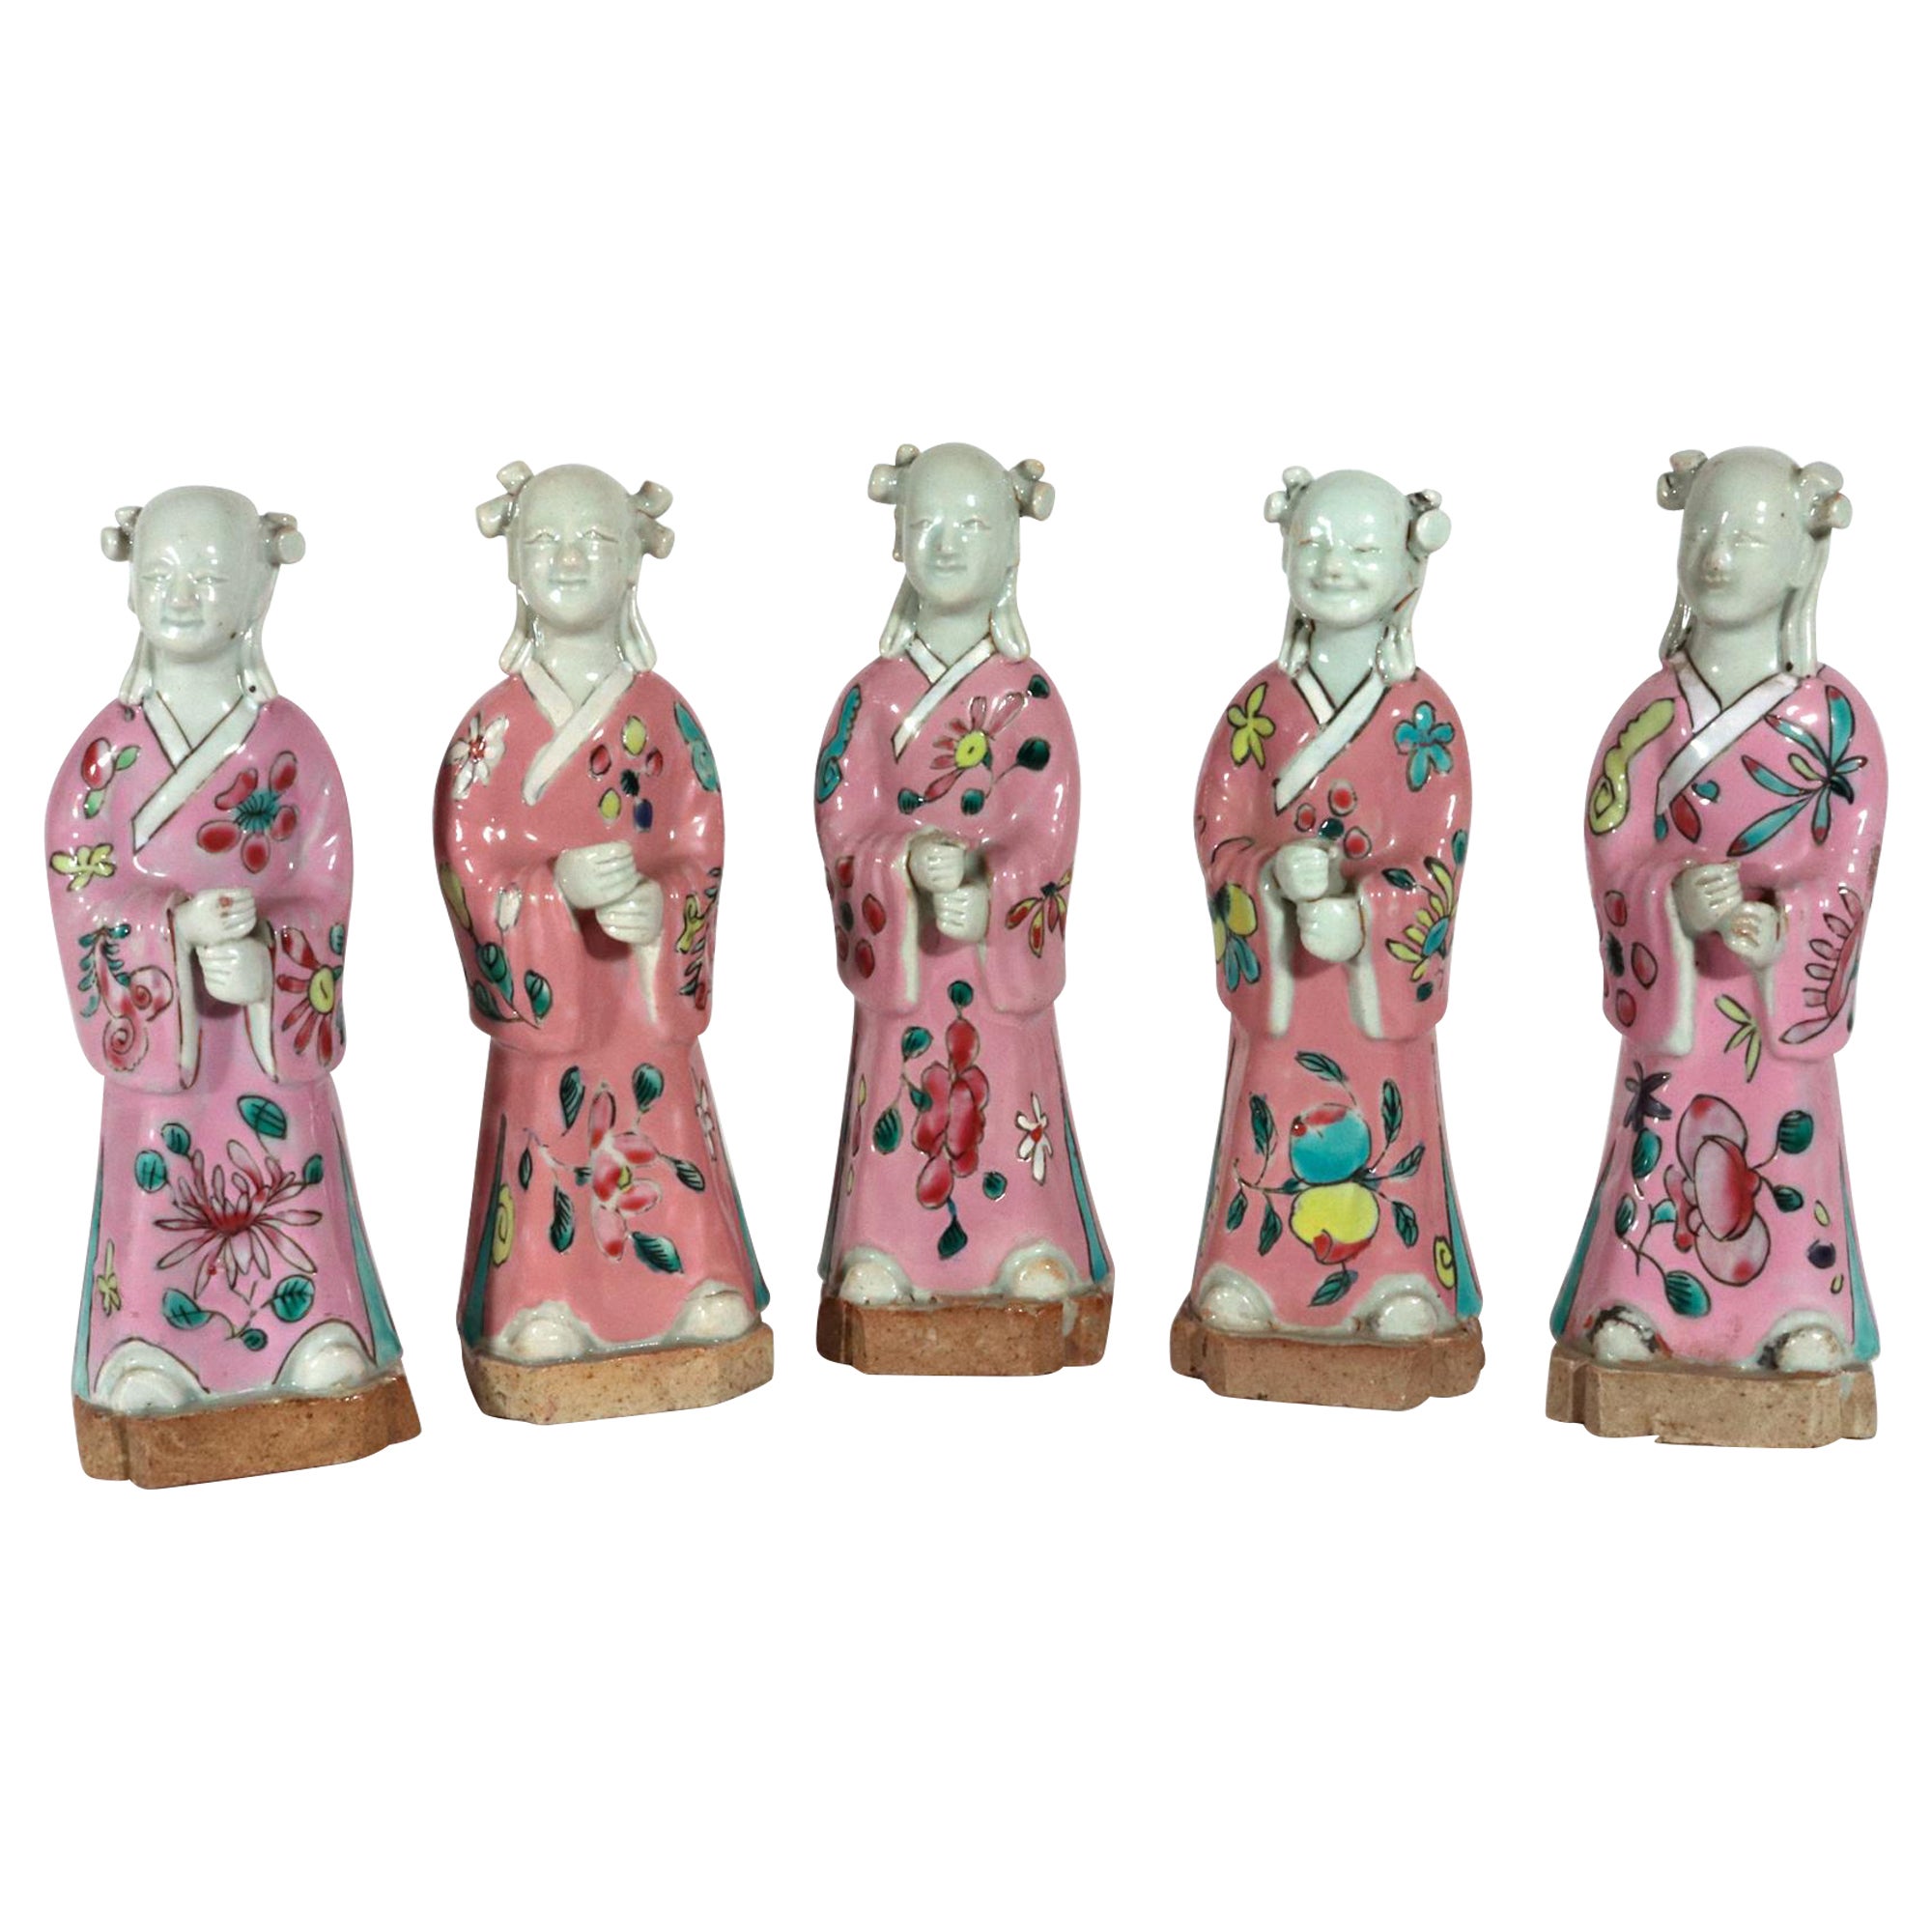 Chinese Export Porcelain Figures of Attendants, Set of Five